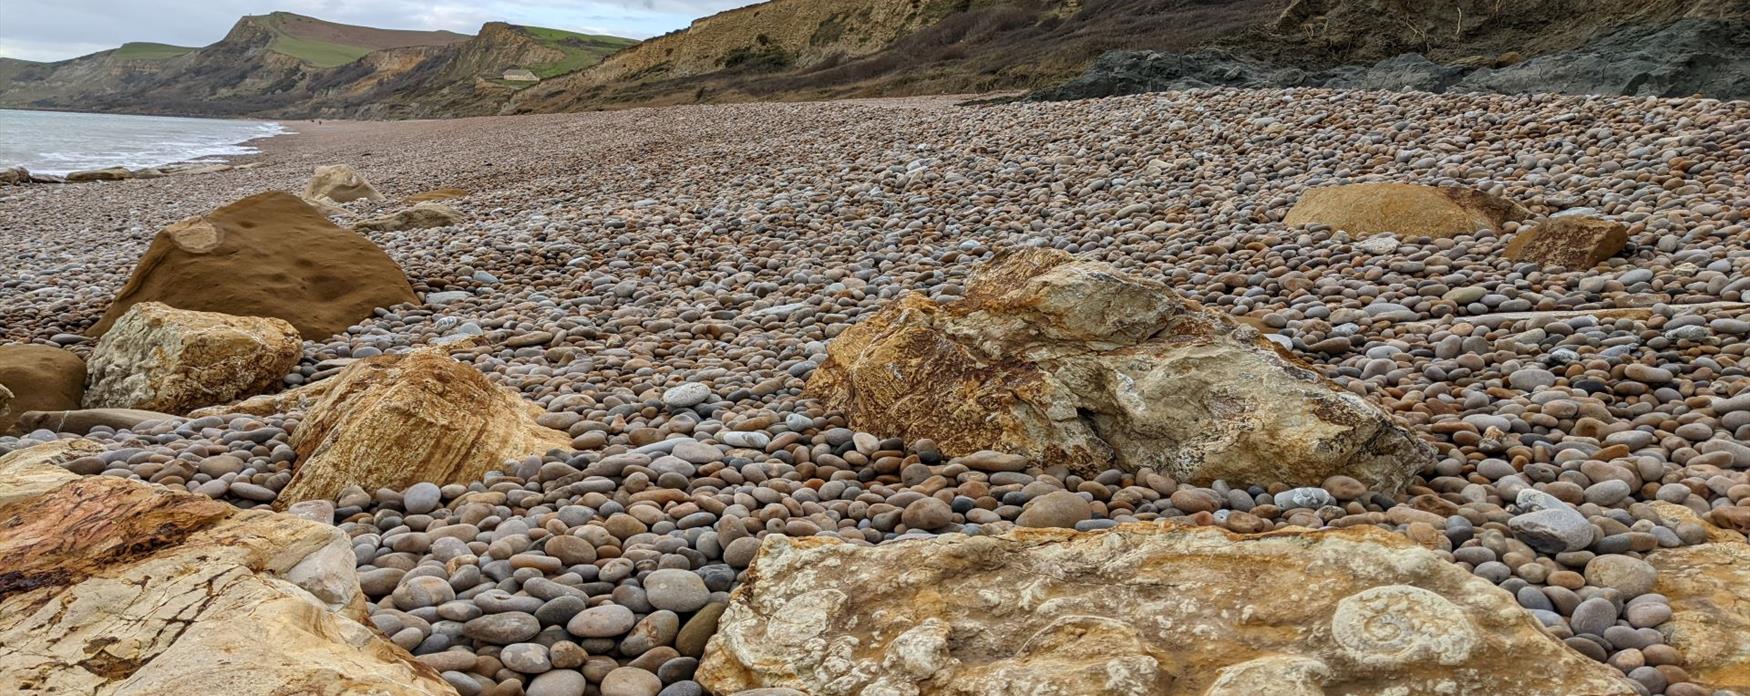 A close-up view of sandy coloured sandstone rocks with ammonite fossils on their surface. The pebble beach and large sandy cliffs extend off into the distance on the right side of the image. The sea glistens with a slight grey tinge on the left side.